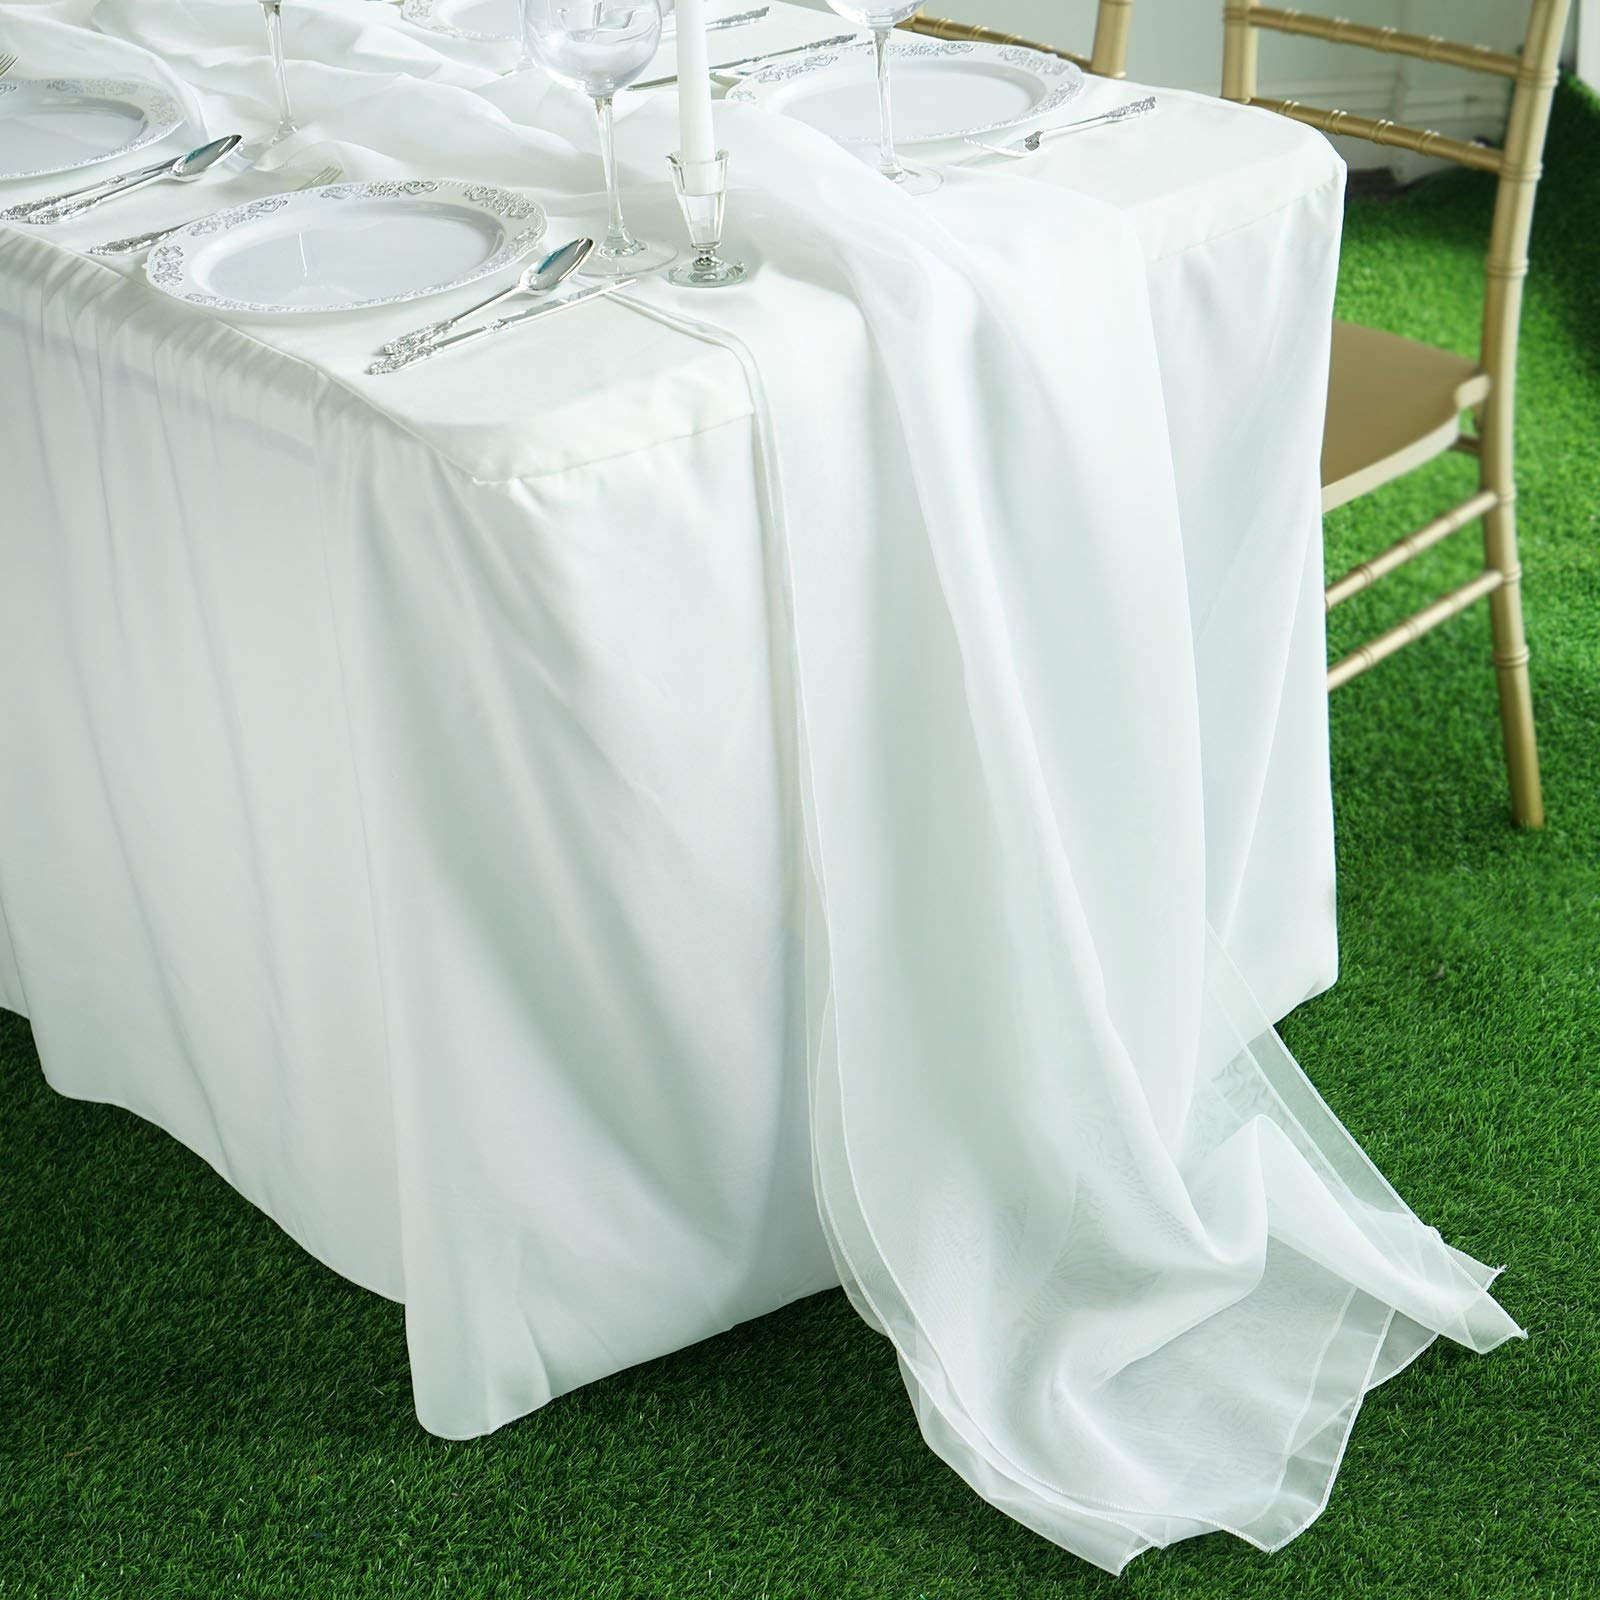 AK TRADING CO. 27" x 120" Wide Chiffon Elegant Table Runner/Overlay Ideally Perfect for Center Table, Wedding Decor, Bridal Shower & Other Special Occasion. (10, Ivory) - image 5 of 5